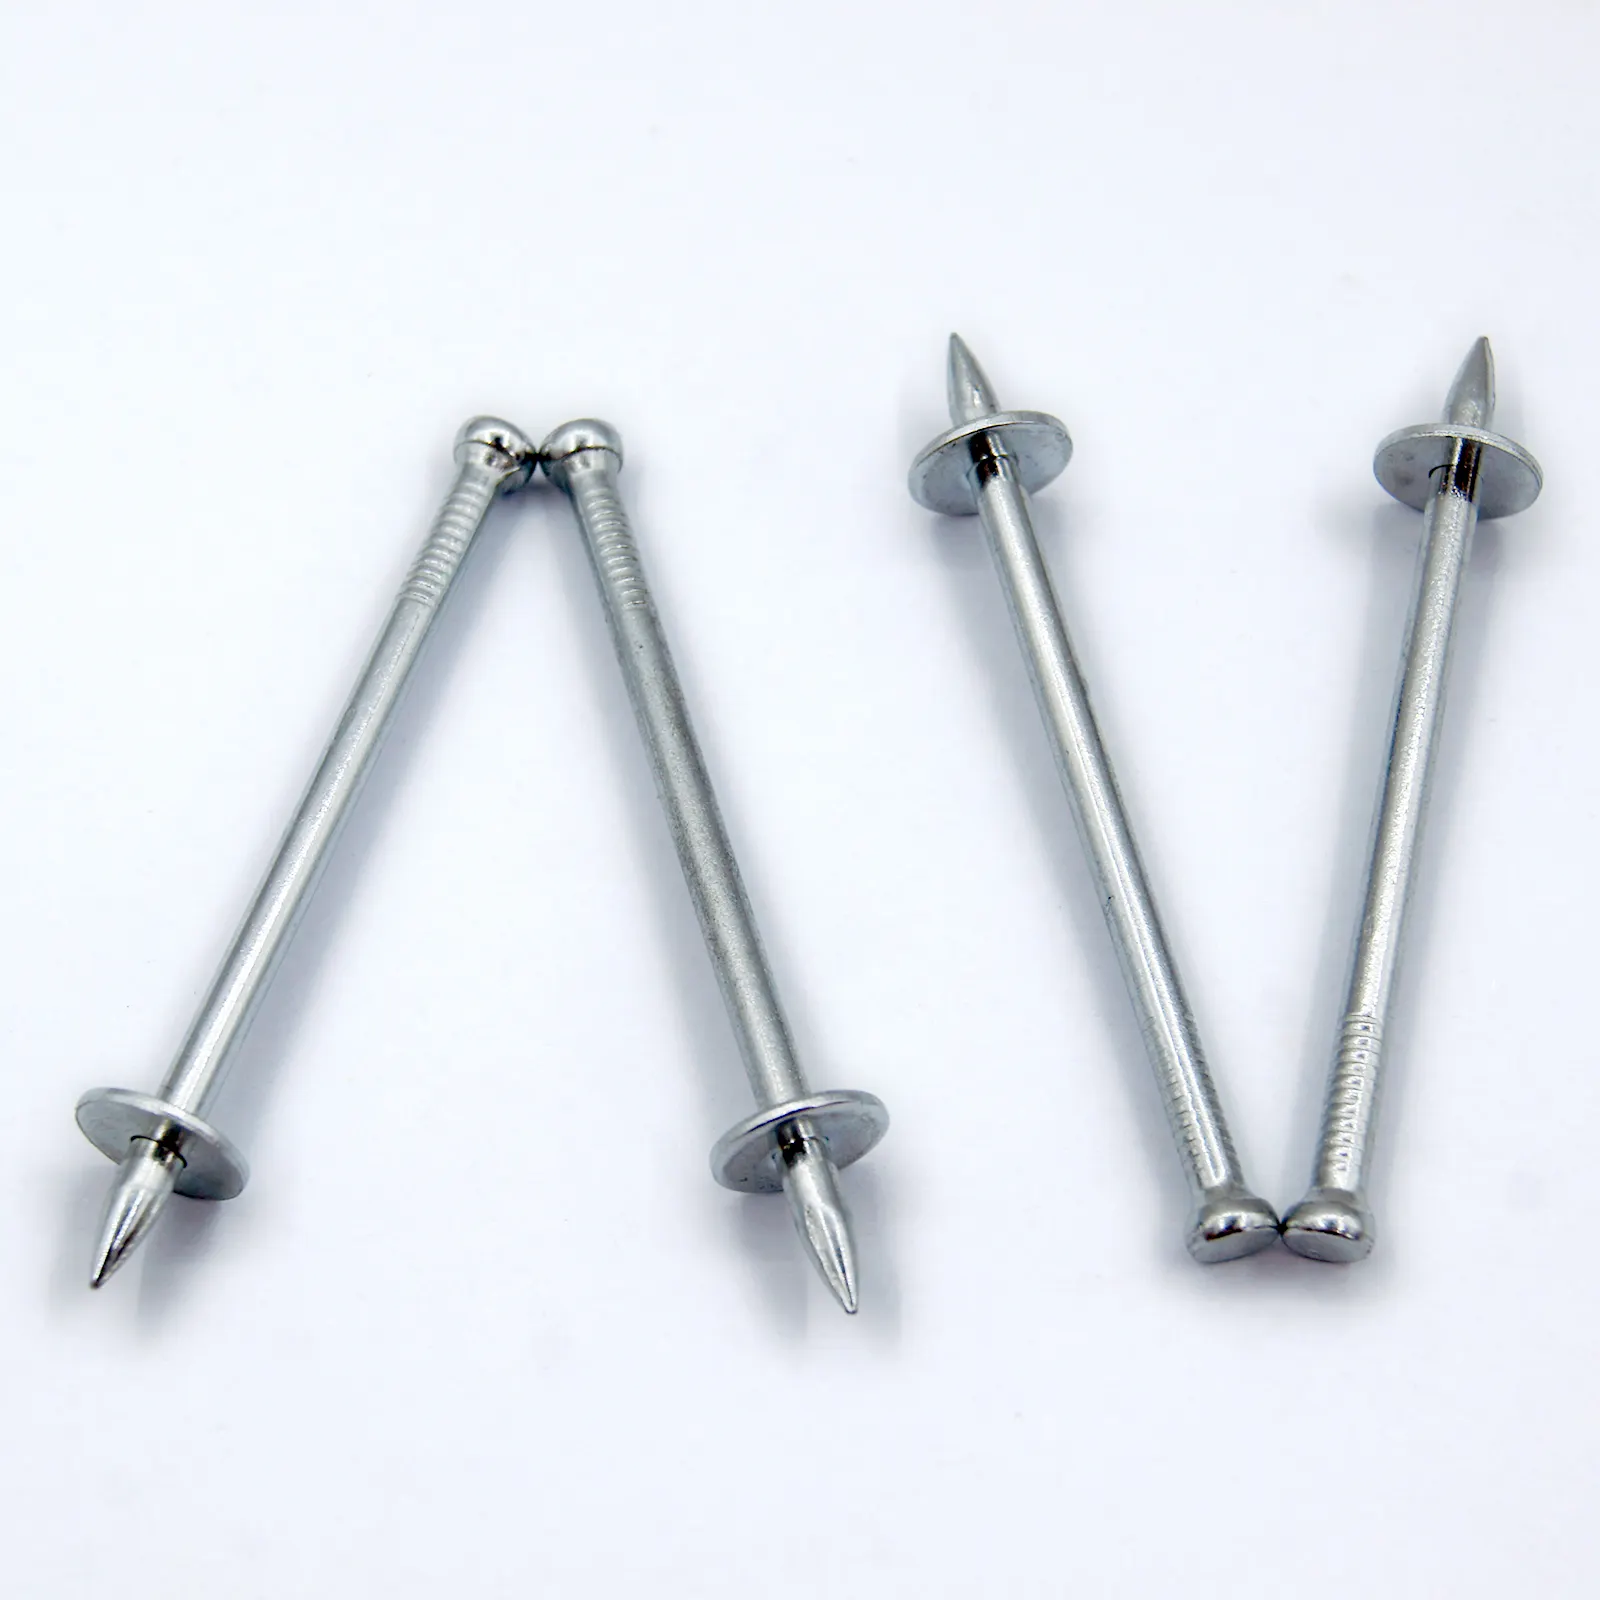 China manufacture NK fastener shoot nail Used for building installation and fixing